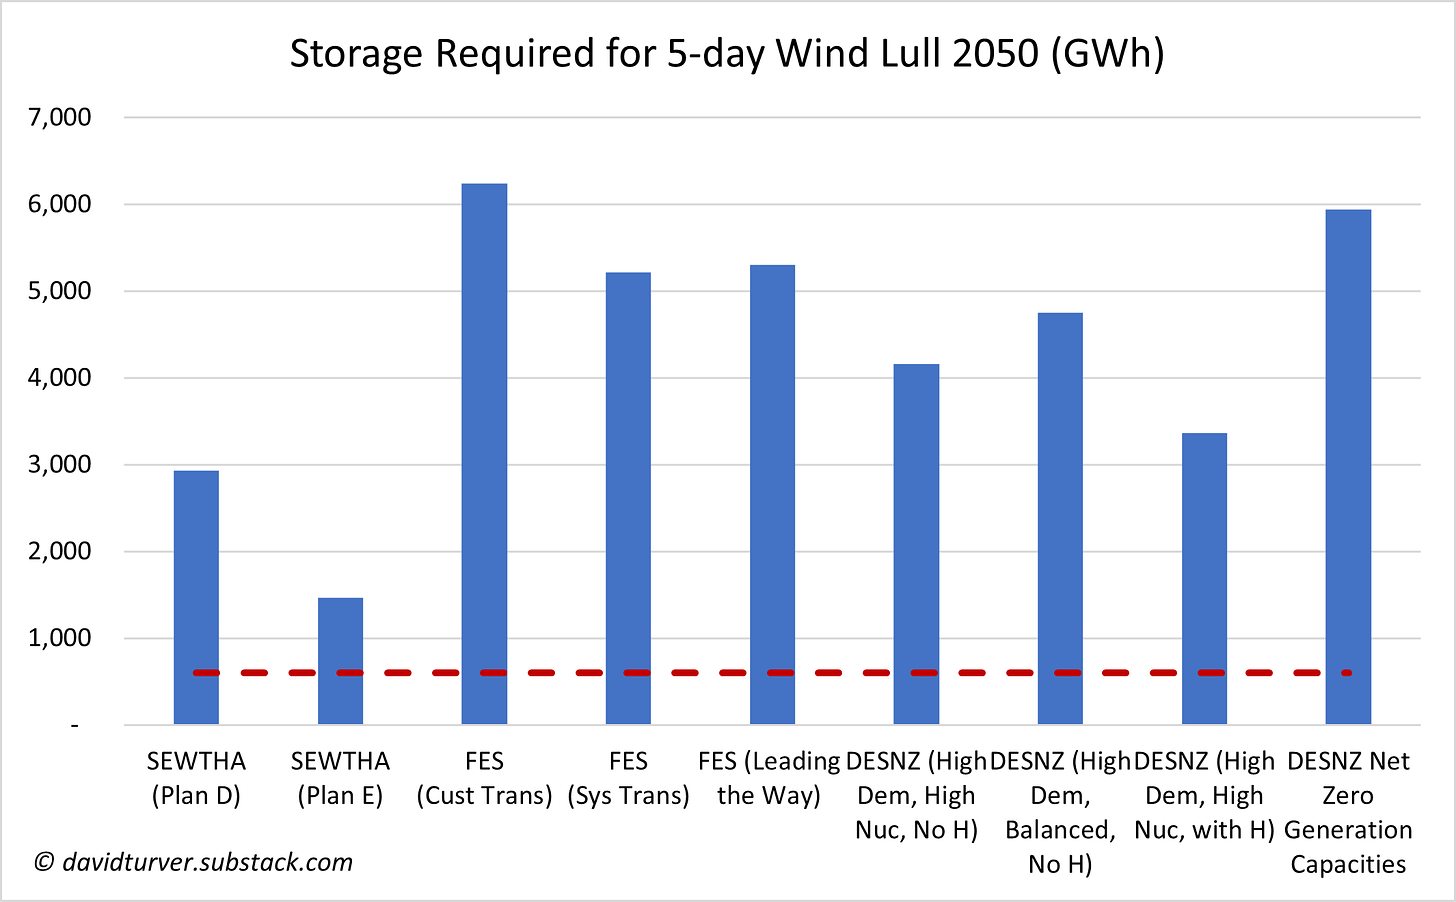 Storage Required for 5-day Wind Lull by Scenario (GWh)